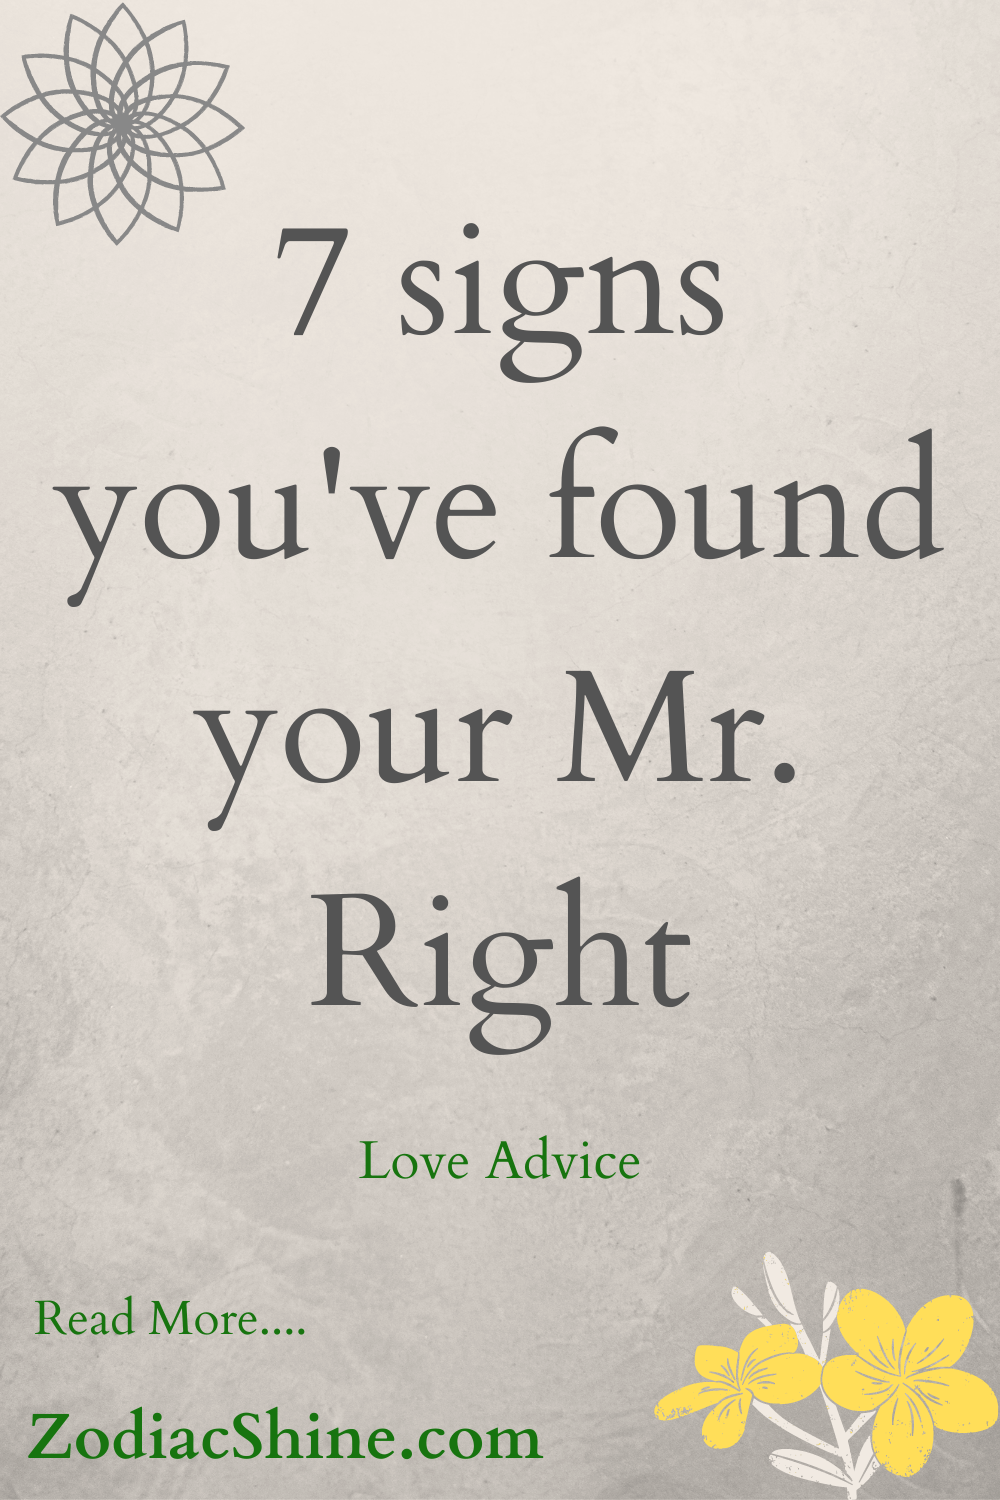 7 signs you've found your Mr. Right